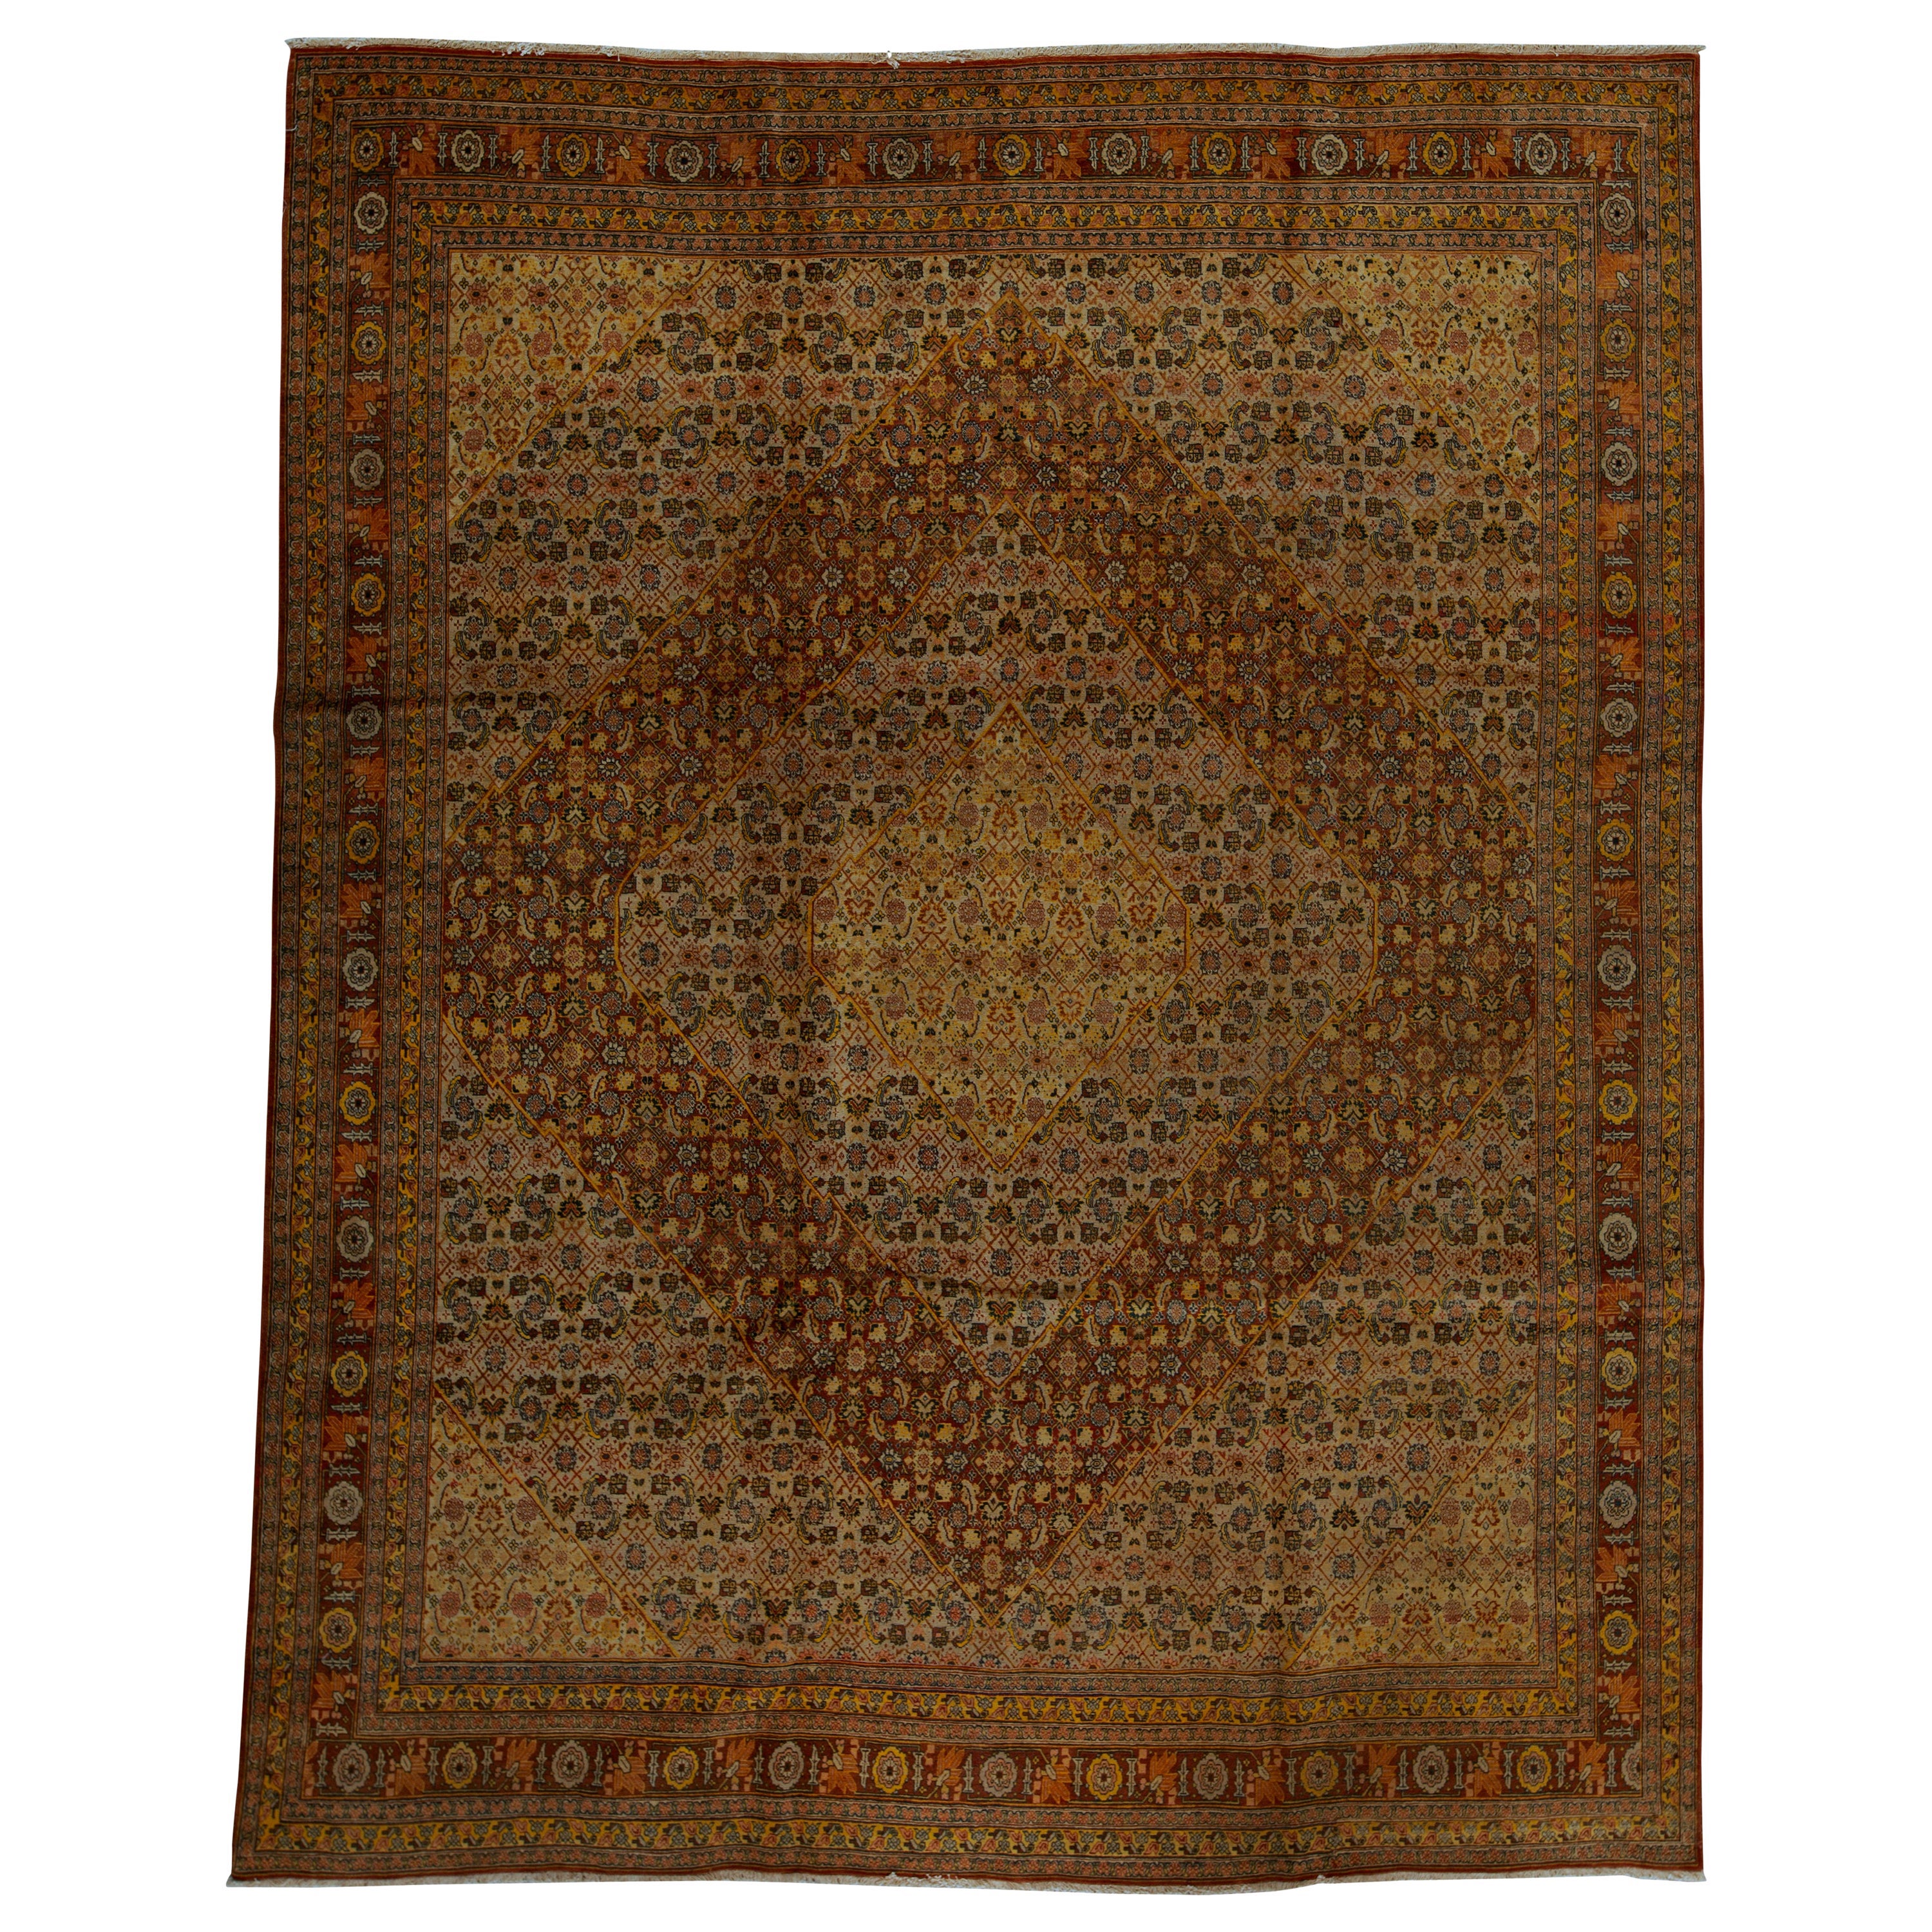 Antique Persian Fine Traditional Handwoven Luxury Wool Cream / Brown Rug